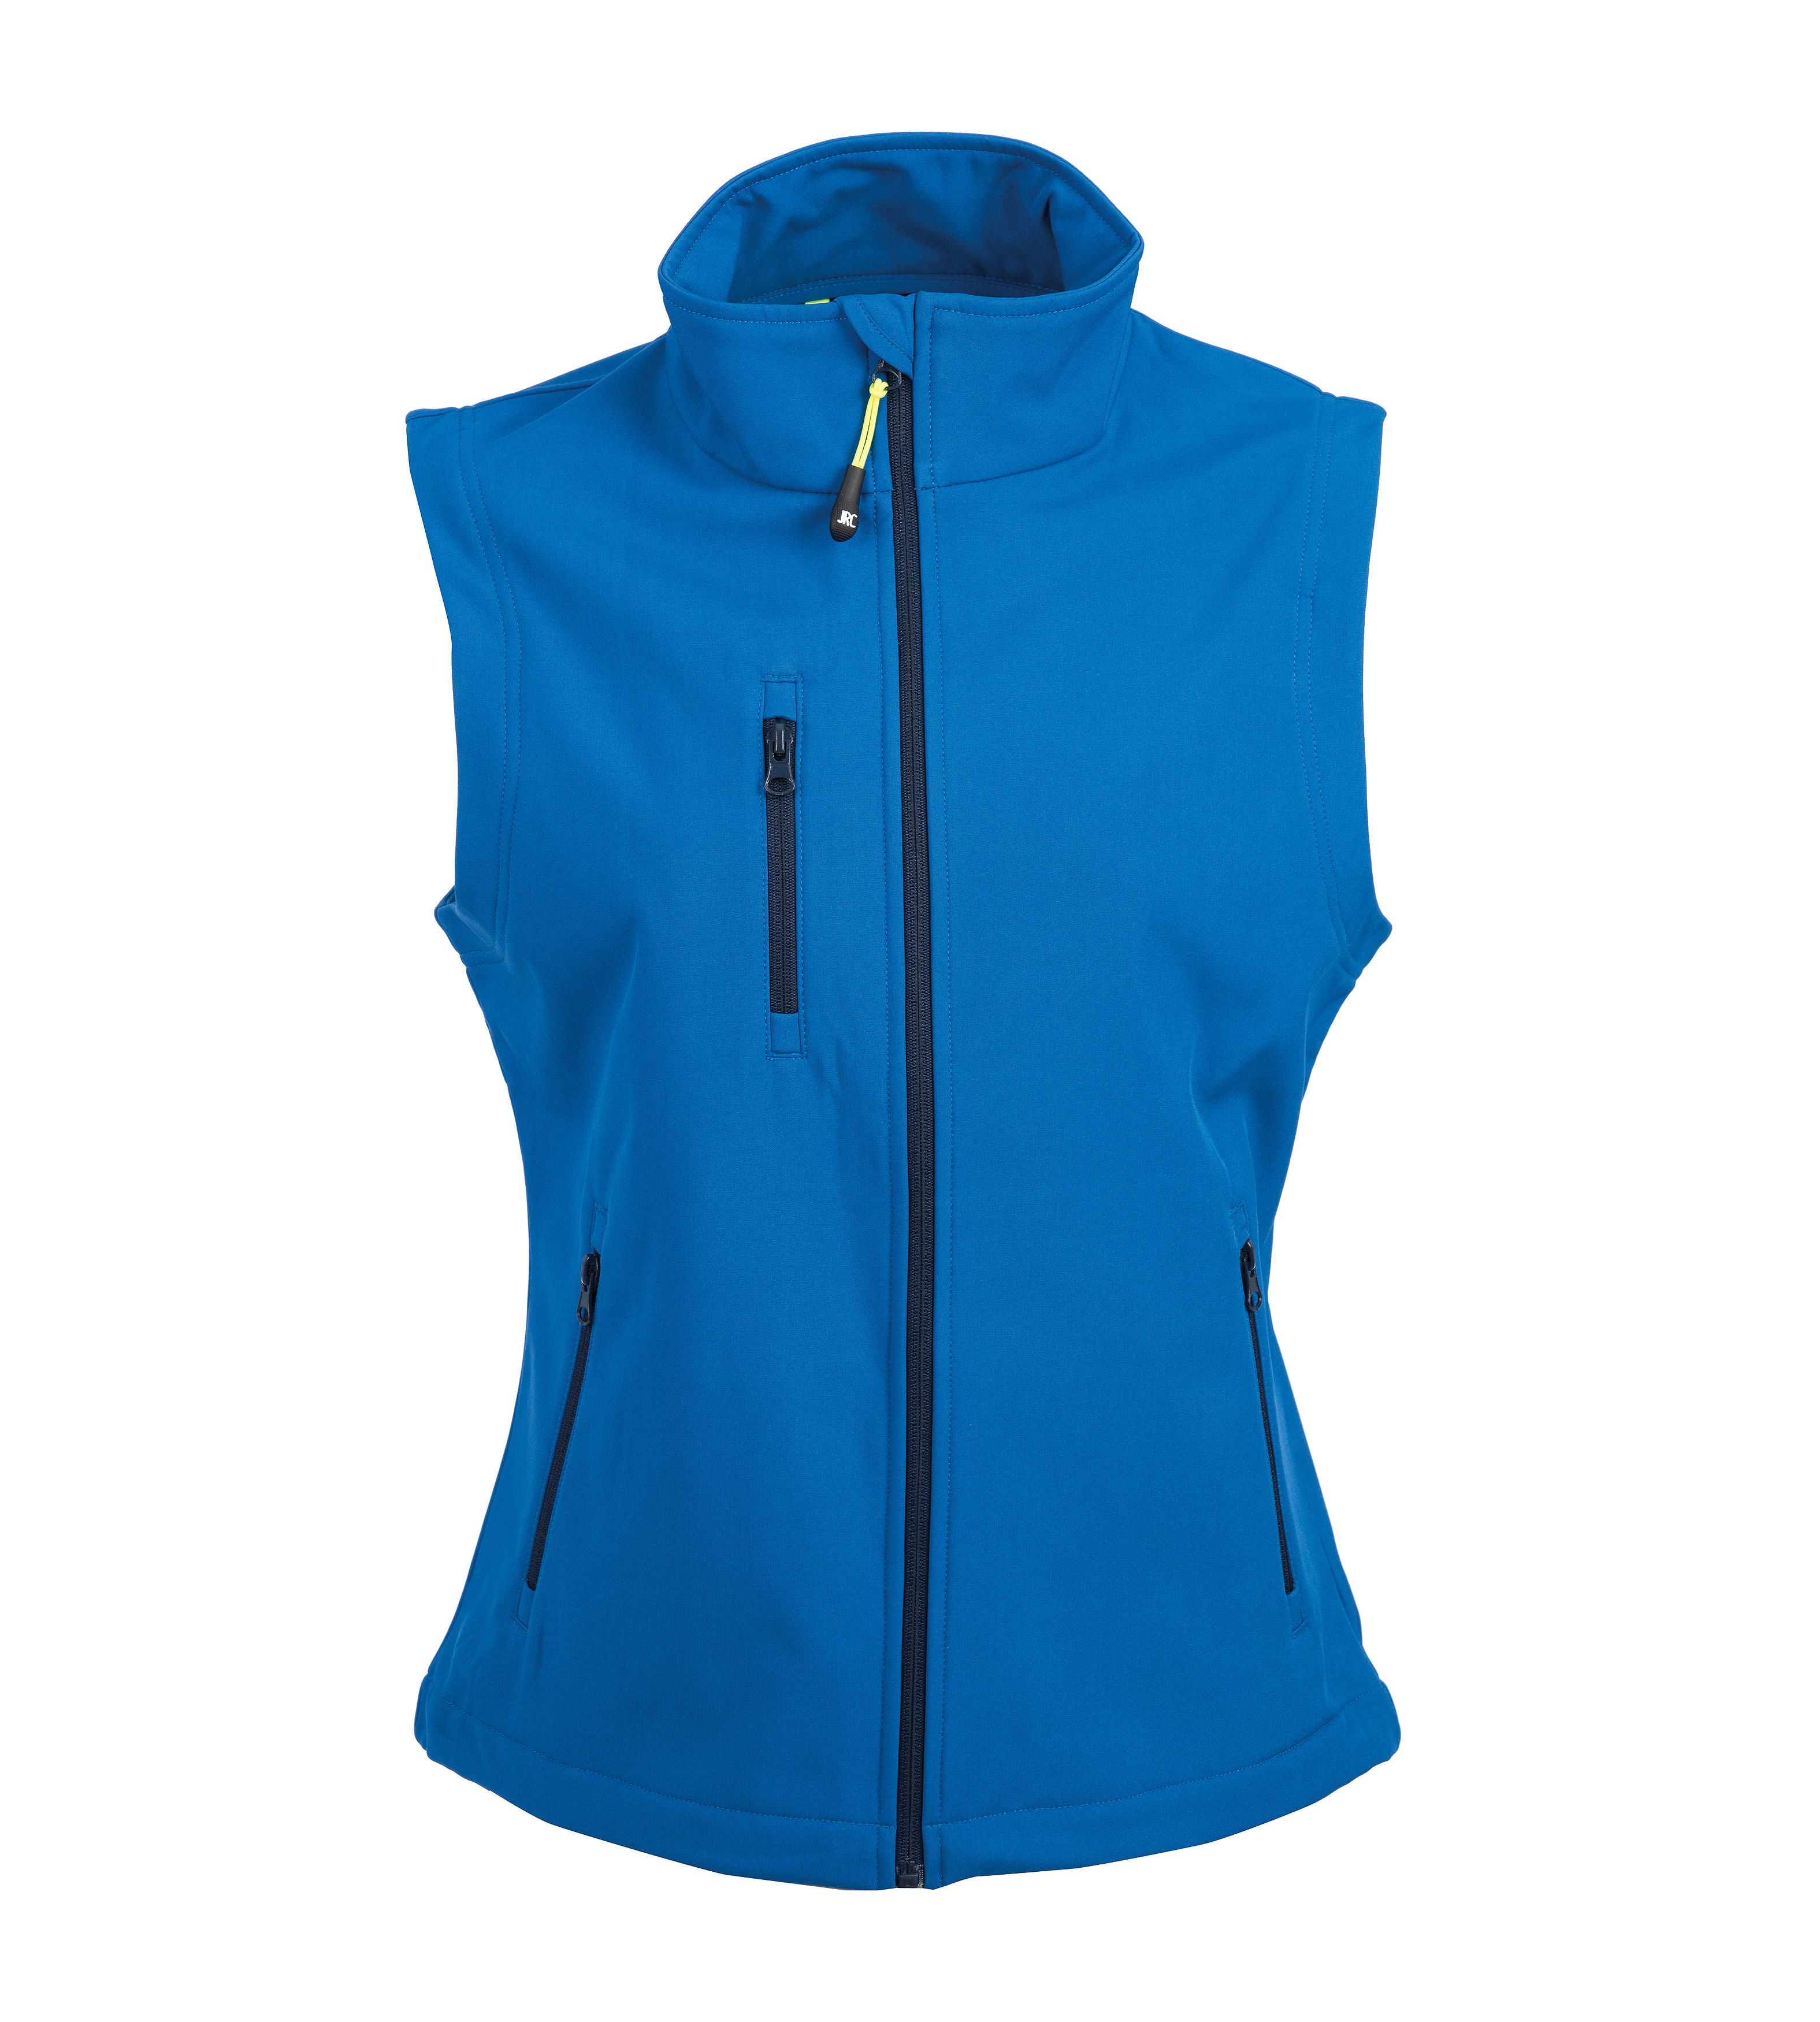 Gilet Tarvisio Lady (variante colore: royal)